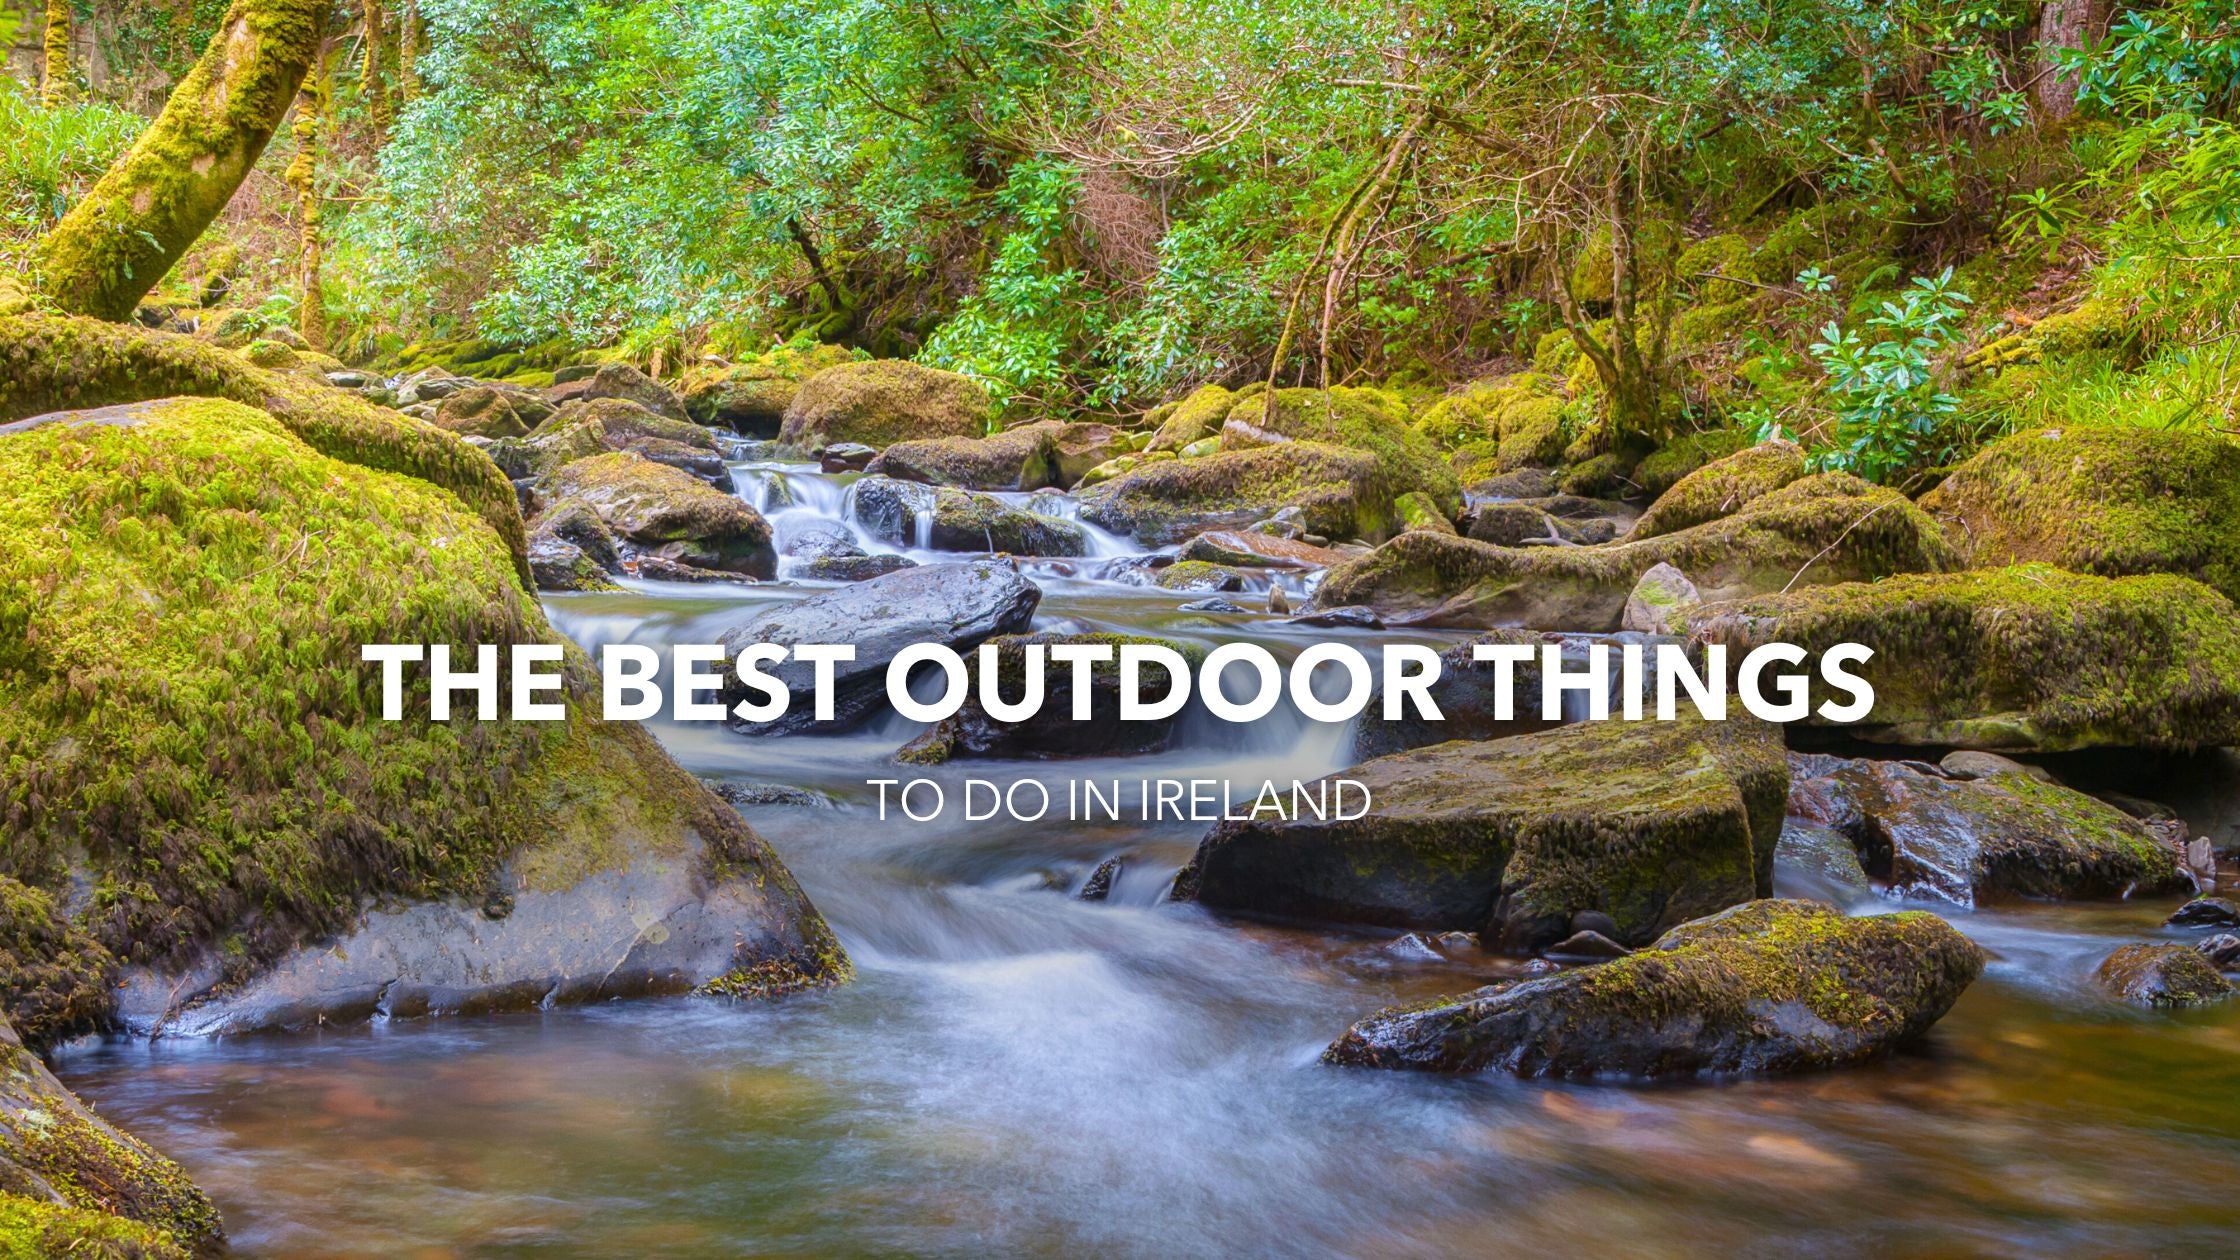 The Best Outdoor Things to Do in Ireland